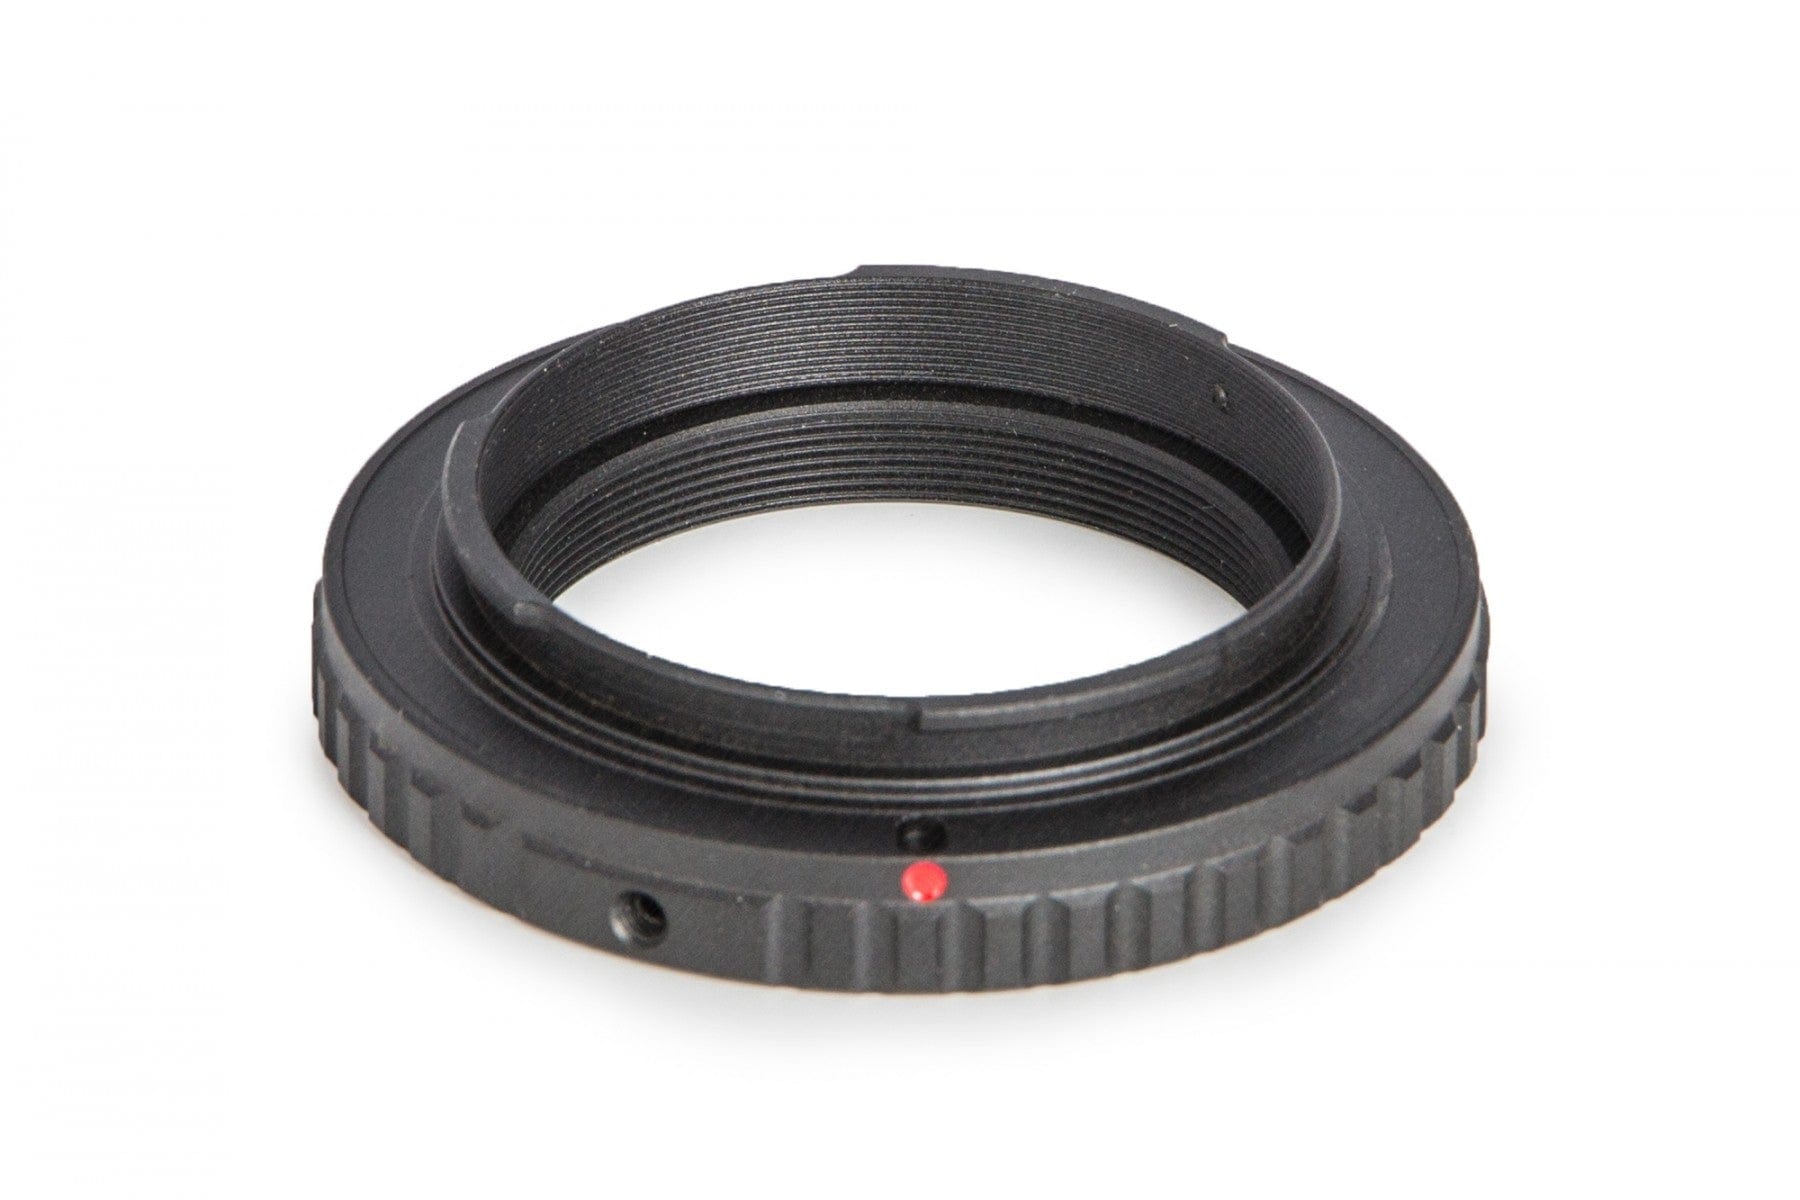 Baader Planetarium Accessory Baader Wide T-Ring Sony Alpha and Minolta Maxxum with D52i to T-2 and S52 - 2408334